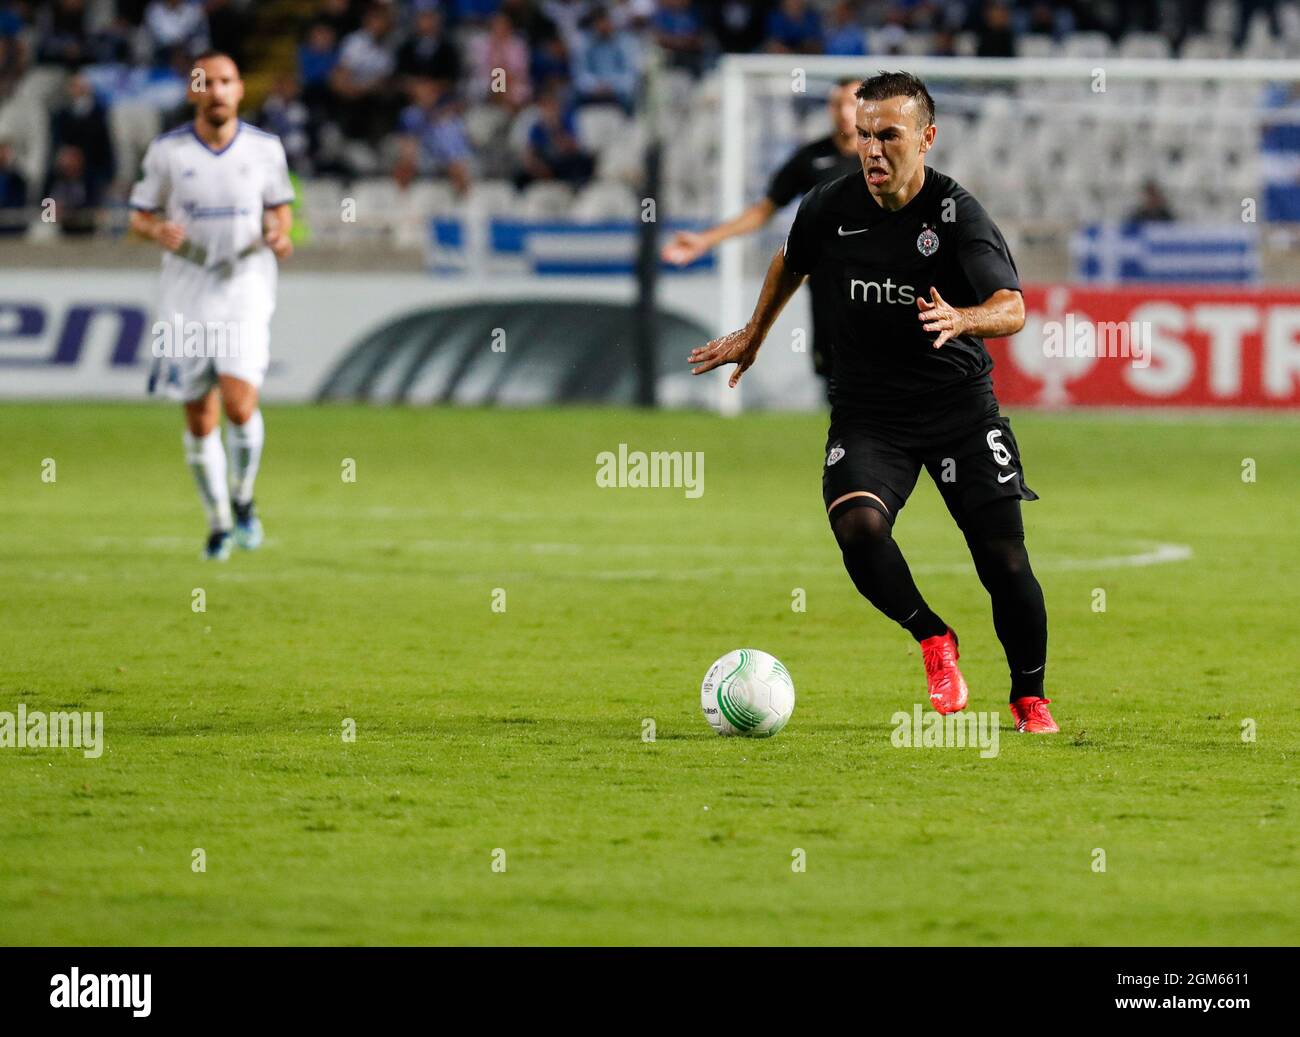 Nicosia, Cyprus. 16th Sep, 2021. Bibras Natcho from Partizan seen in action  during the UEFA Champions League group B match between Anorthosis and  Partizan at GSP stadium. (Final score; Anorthosis 0:2 Partizan) (